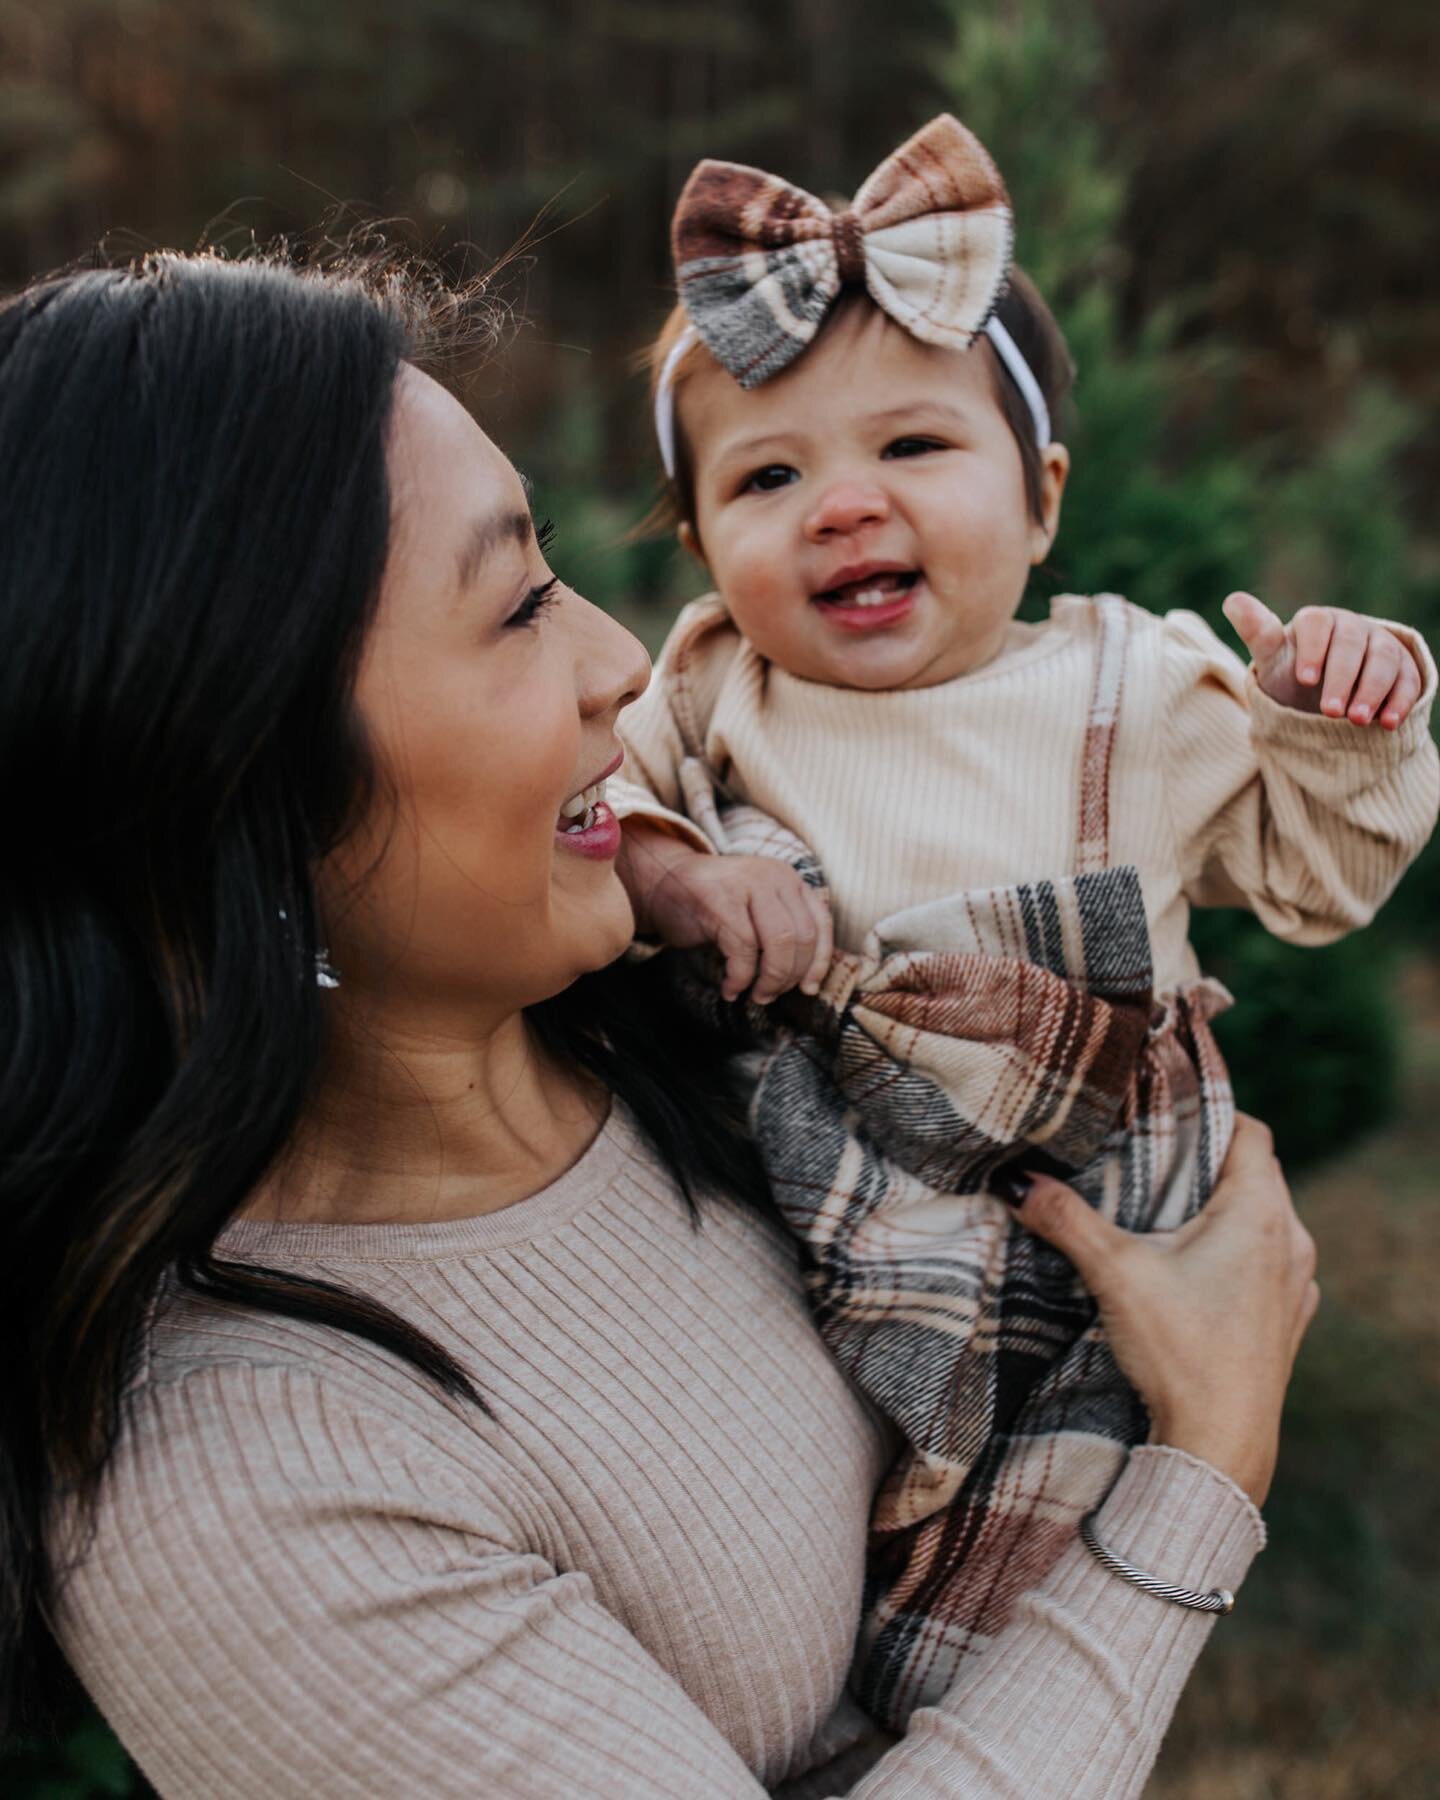 Mother&rsquo;s Day | Spring mini sessions are here! We&rsquo;re excited to offer sessions in the DMV, Hampton Roads, and Atlanta metro areas beginning April 20th in Crystal City, Arlington, Virginia and ending May 7th in Atlanta, Georgia.

This is a 